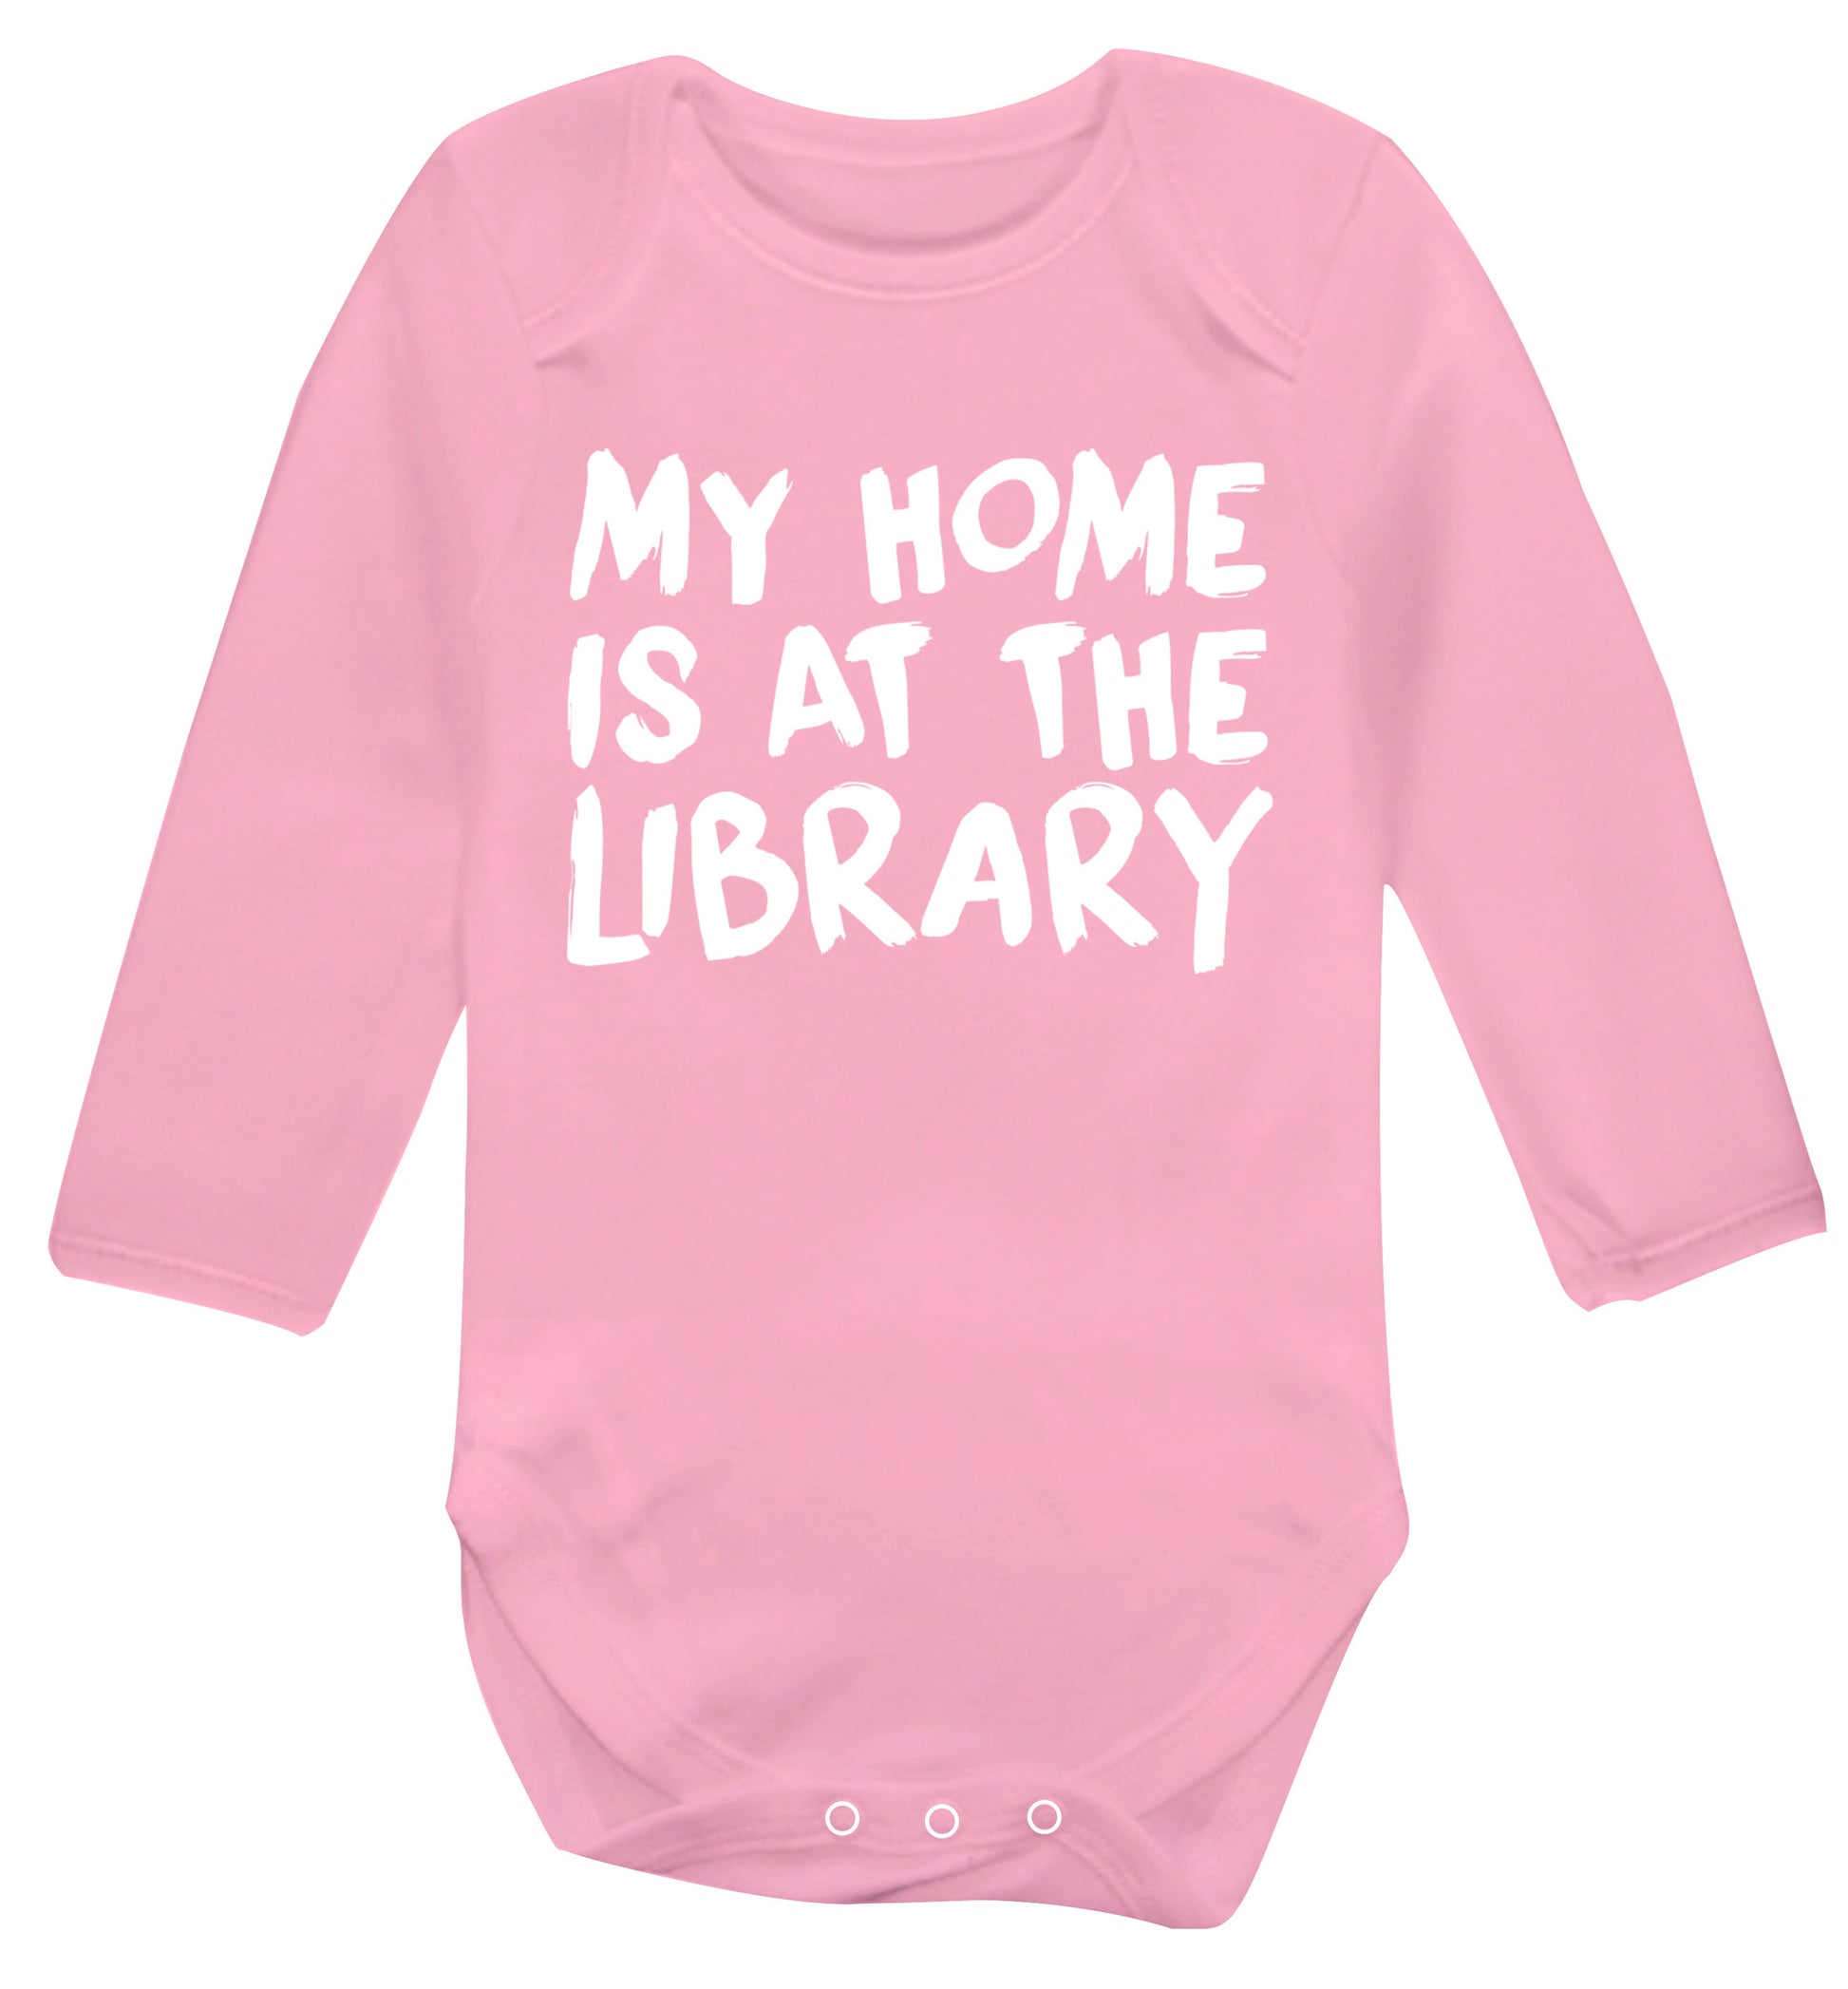 My home is at the library Baby Vest long sleeved pale pink 6-12 months